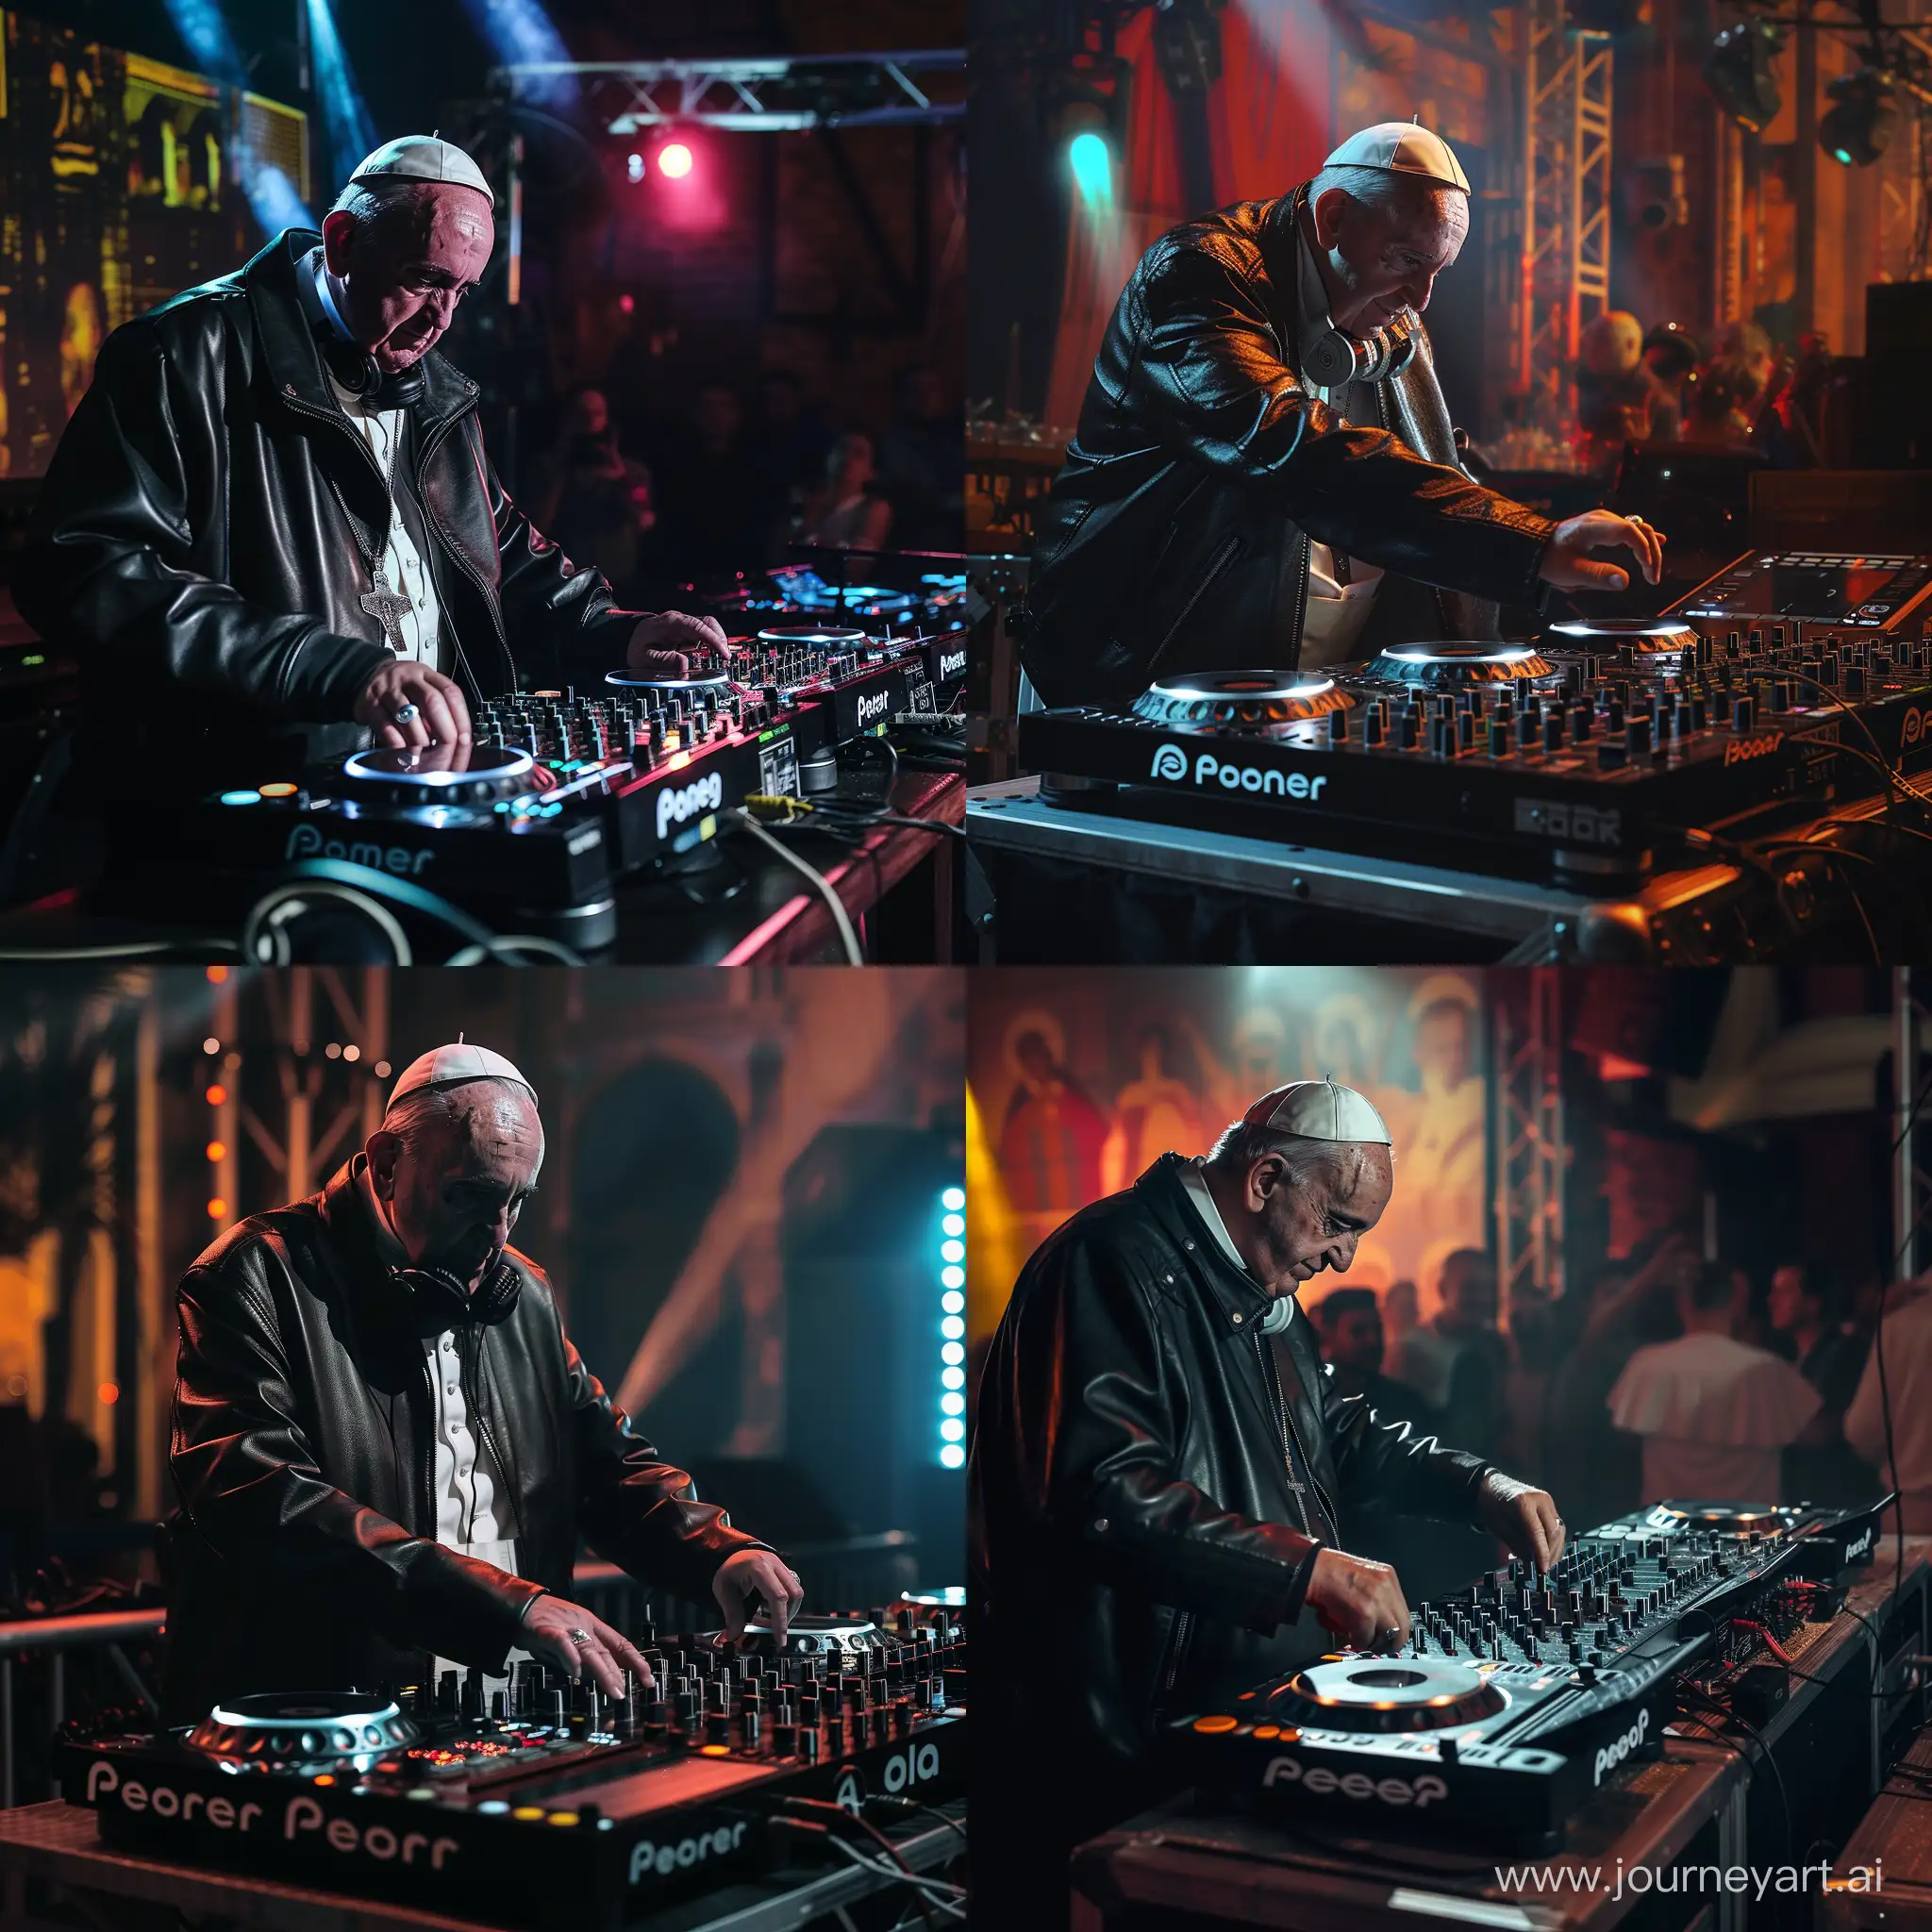 Pope-Francis-as-Leather-JacketClad-DJ-Spins-Live-in-Nightclub